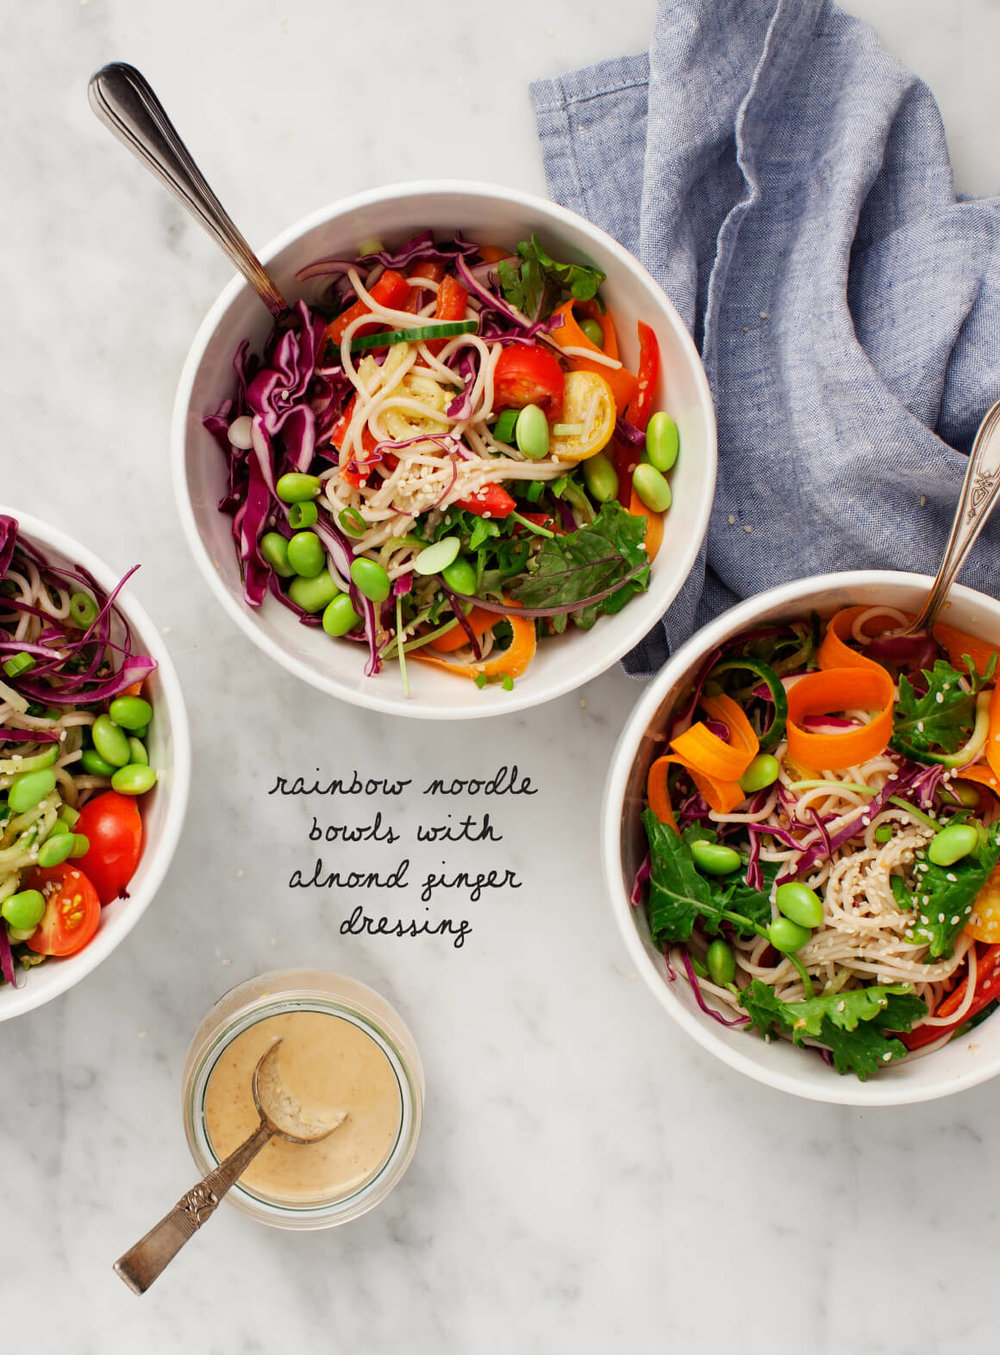  Rainbow Bowls with an almond dressing&nbsp; 